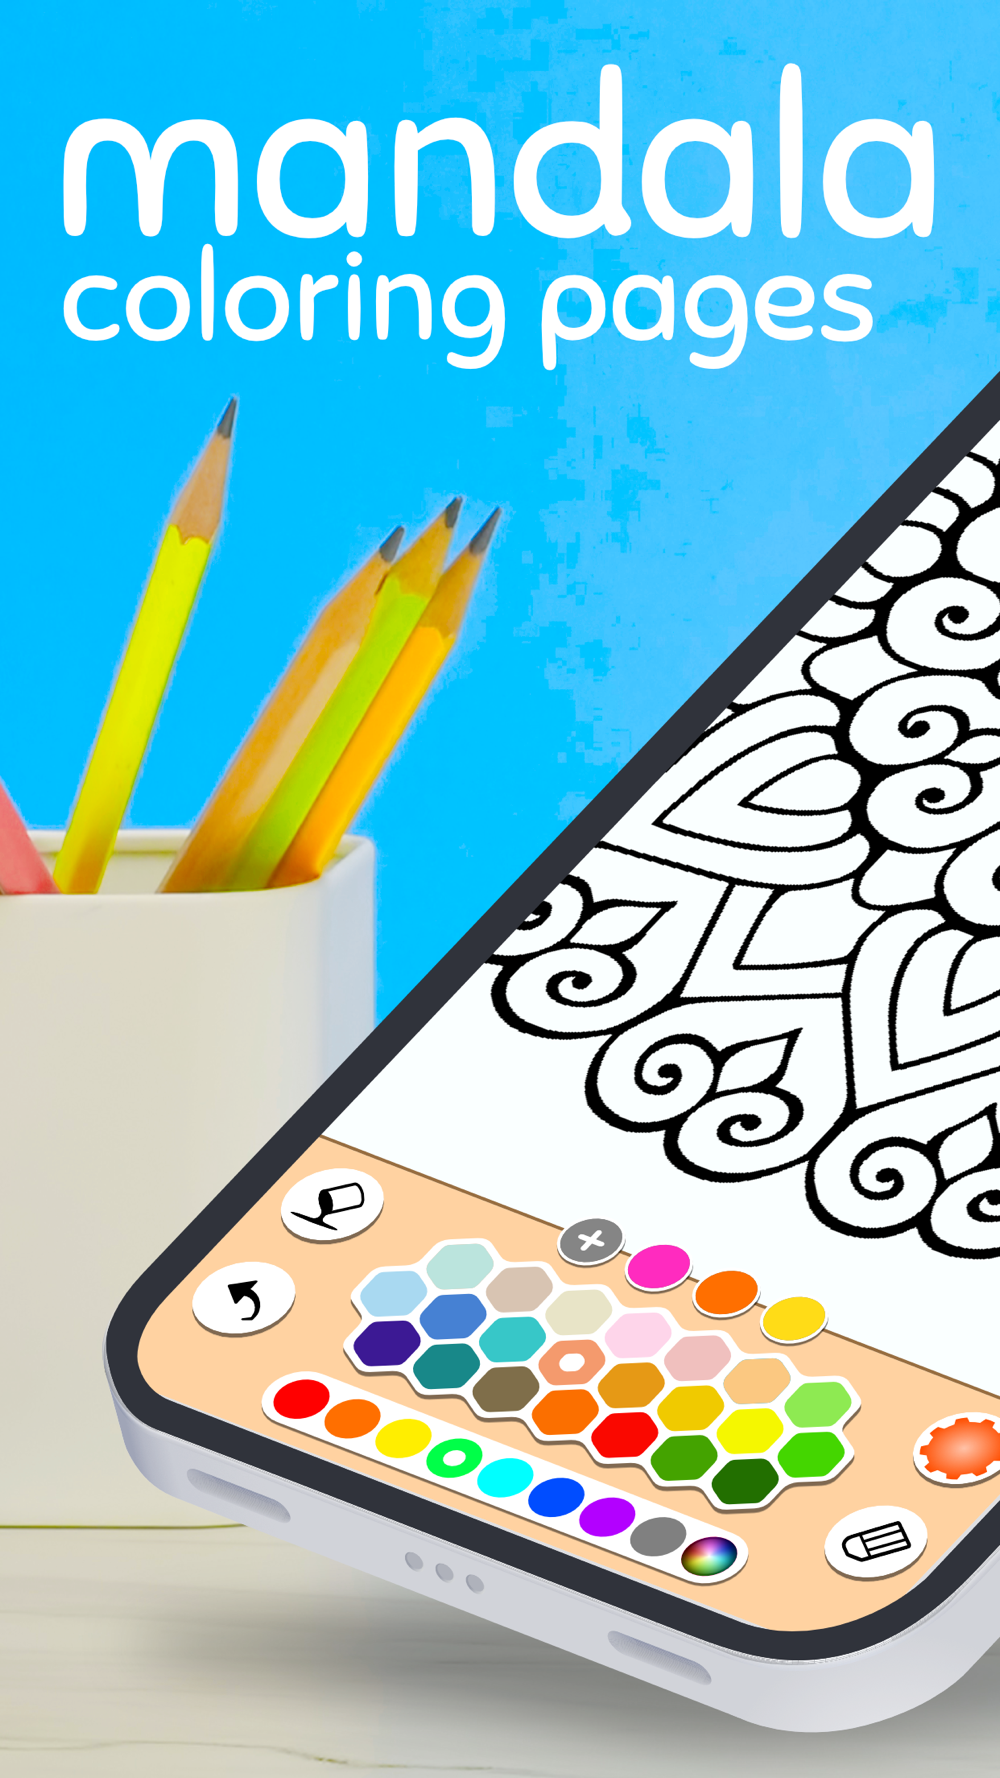 Mandala Coloring Pages Game Free Download App for iPhone ...